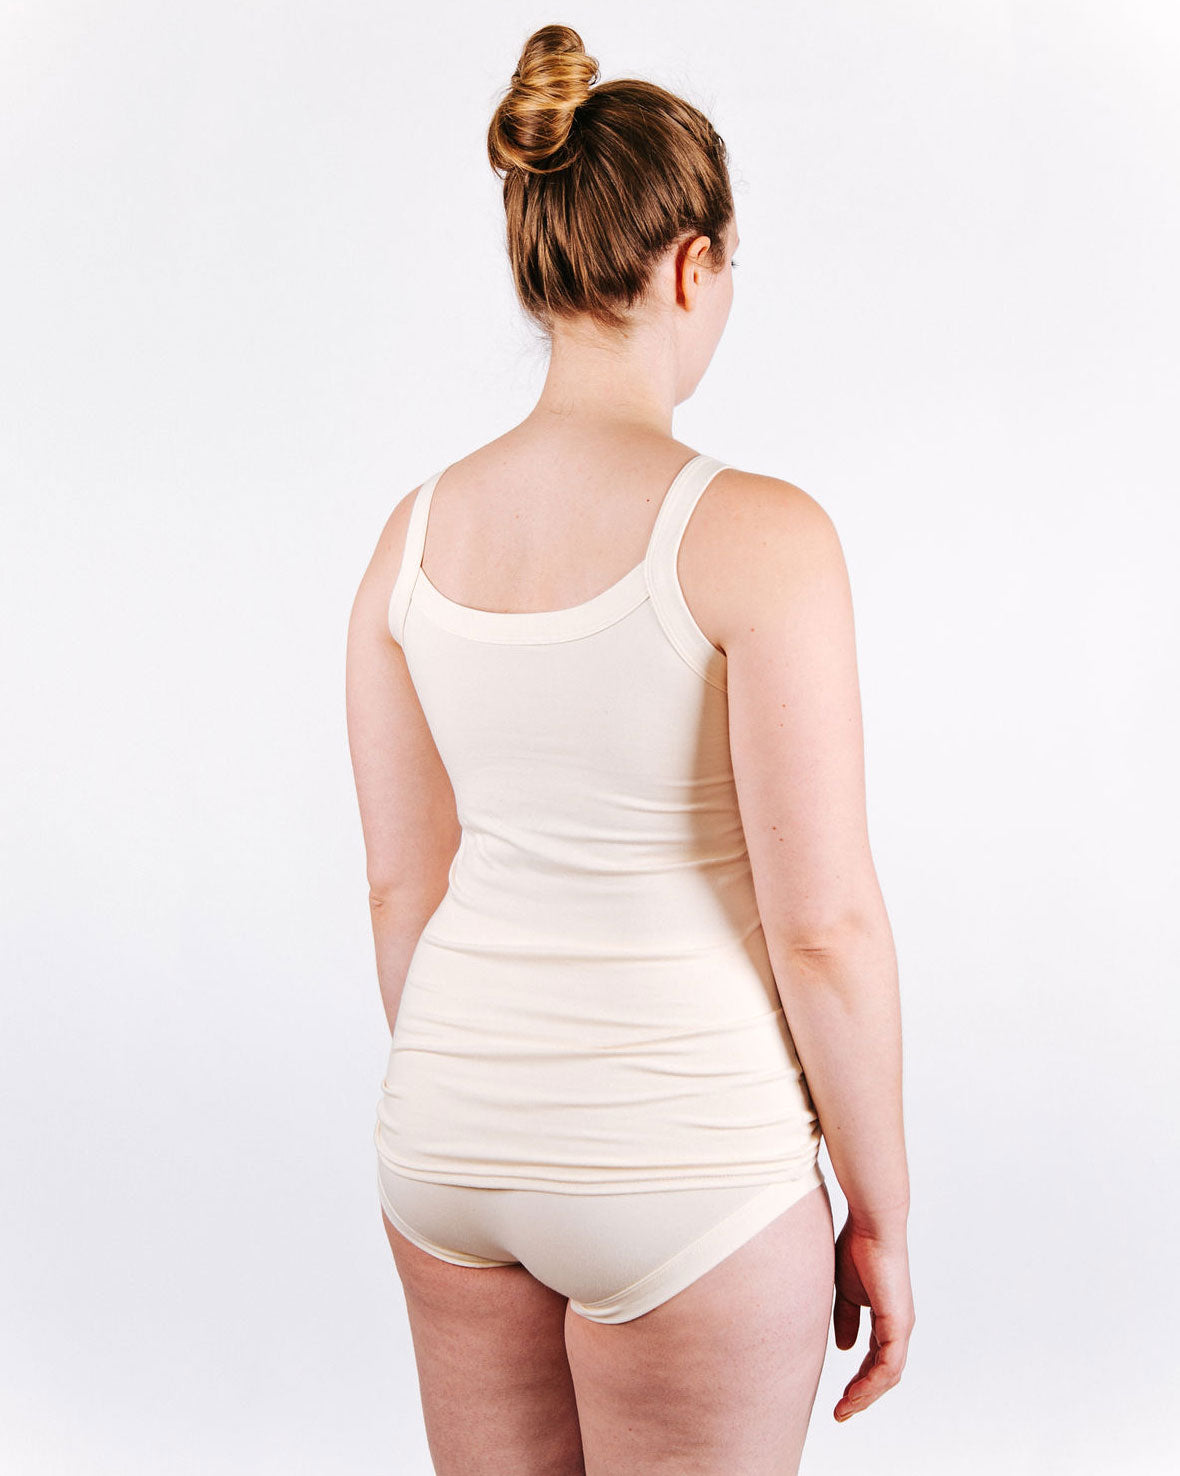 Fit photo from the back of Thunderpants organic cotton Camisole and Hipster style underwear in off-white, showing a wedge-free bum, on a model.